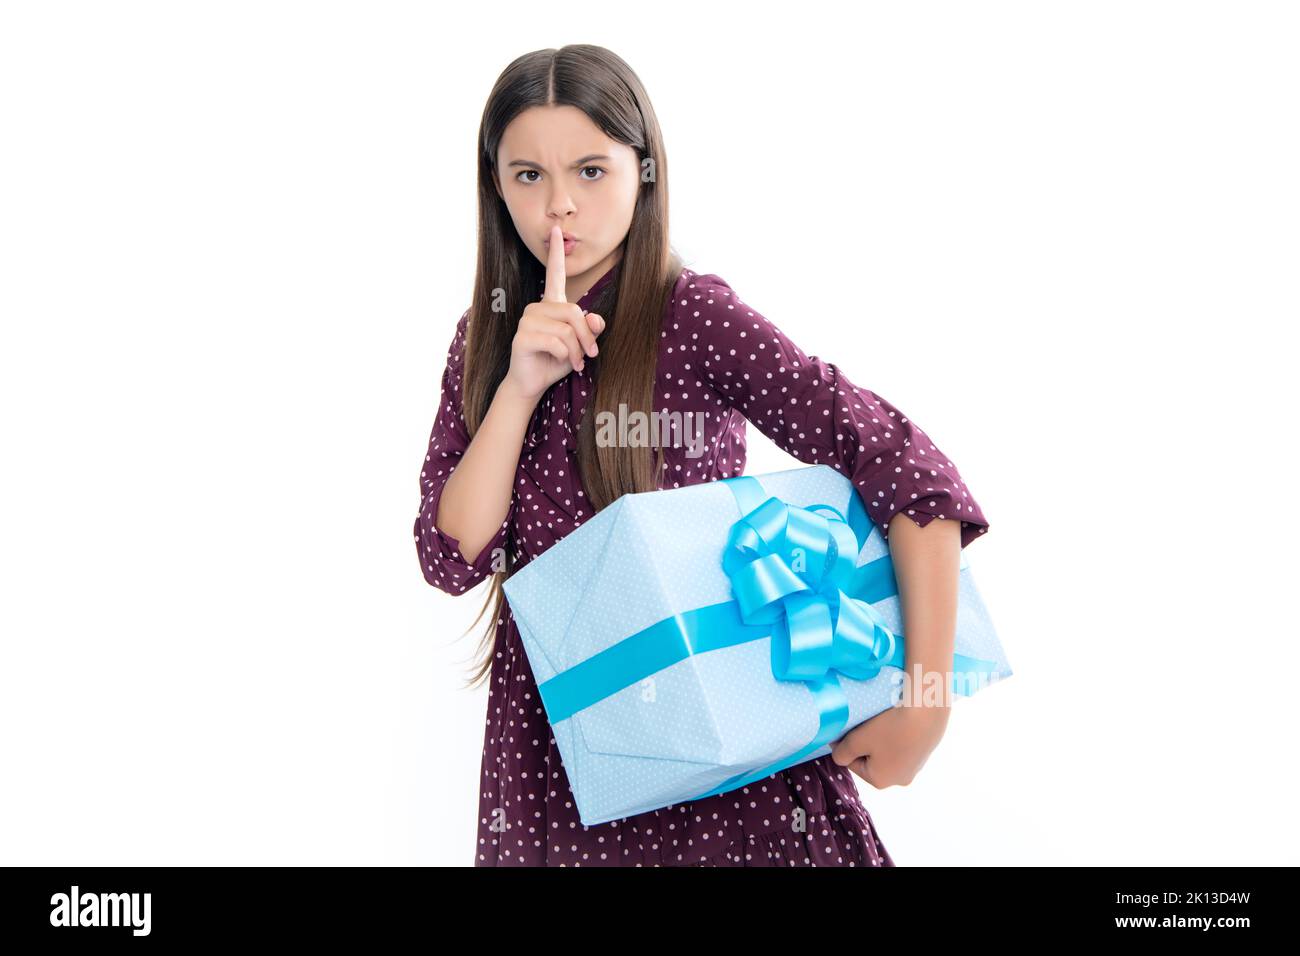 Child with gift present box on isolated studio background. Gifting for kids birthday. Serious teenager girl, shhh secret. Stock Photo